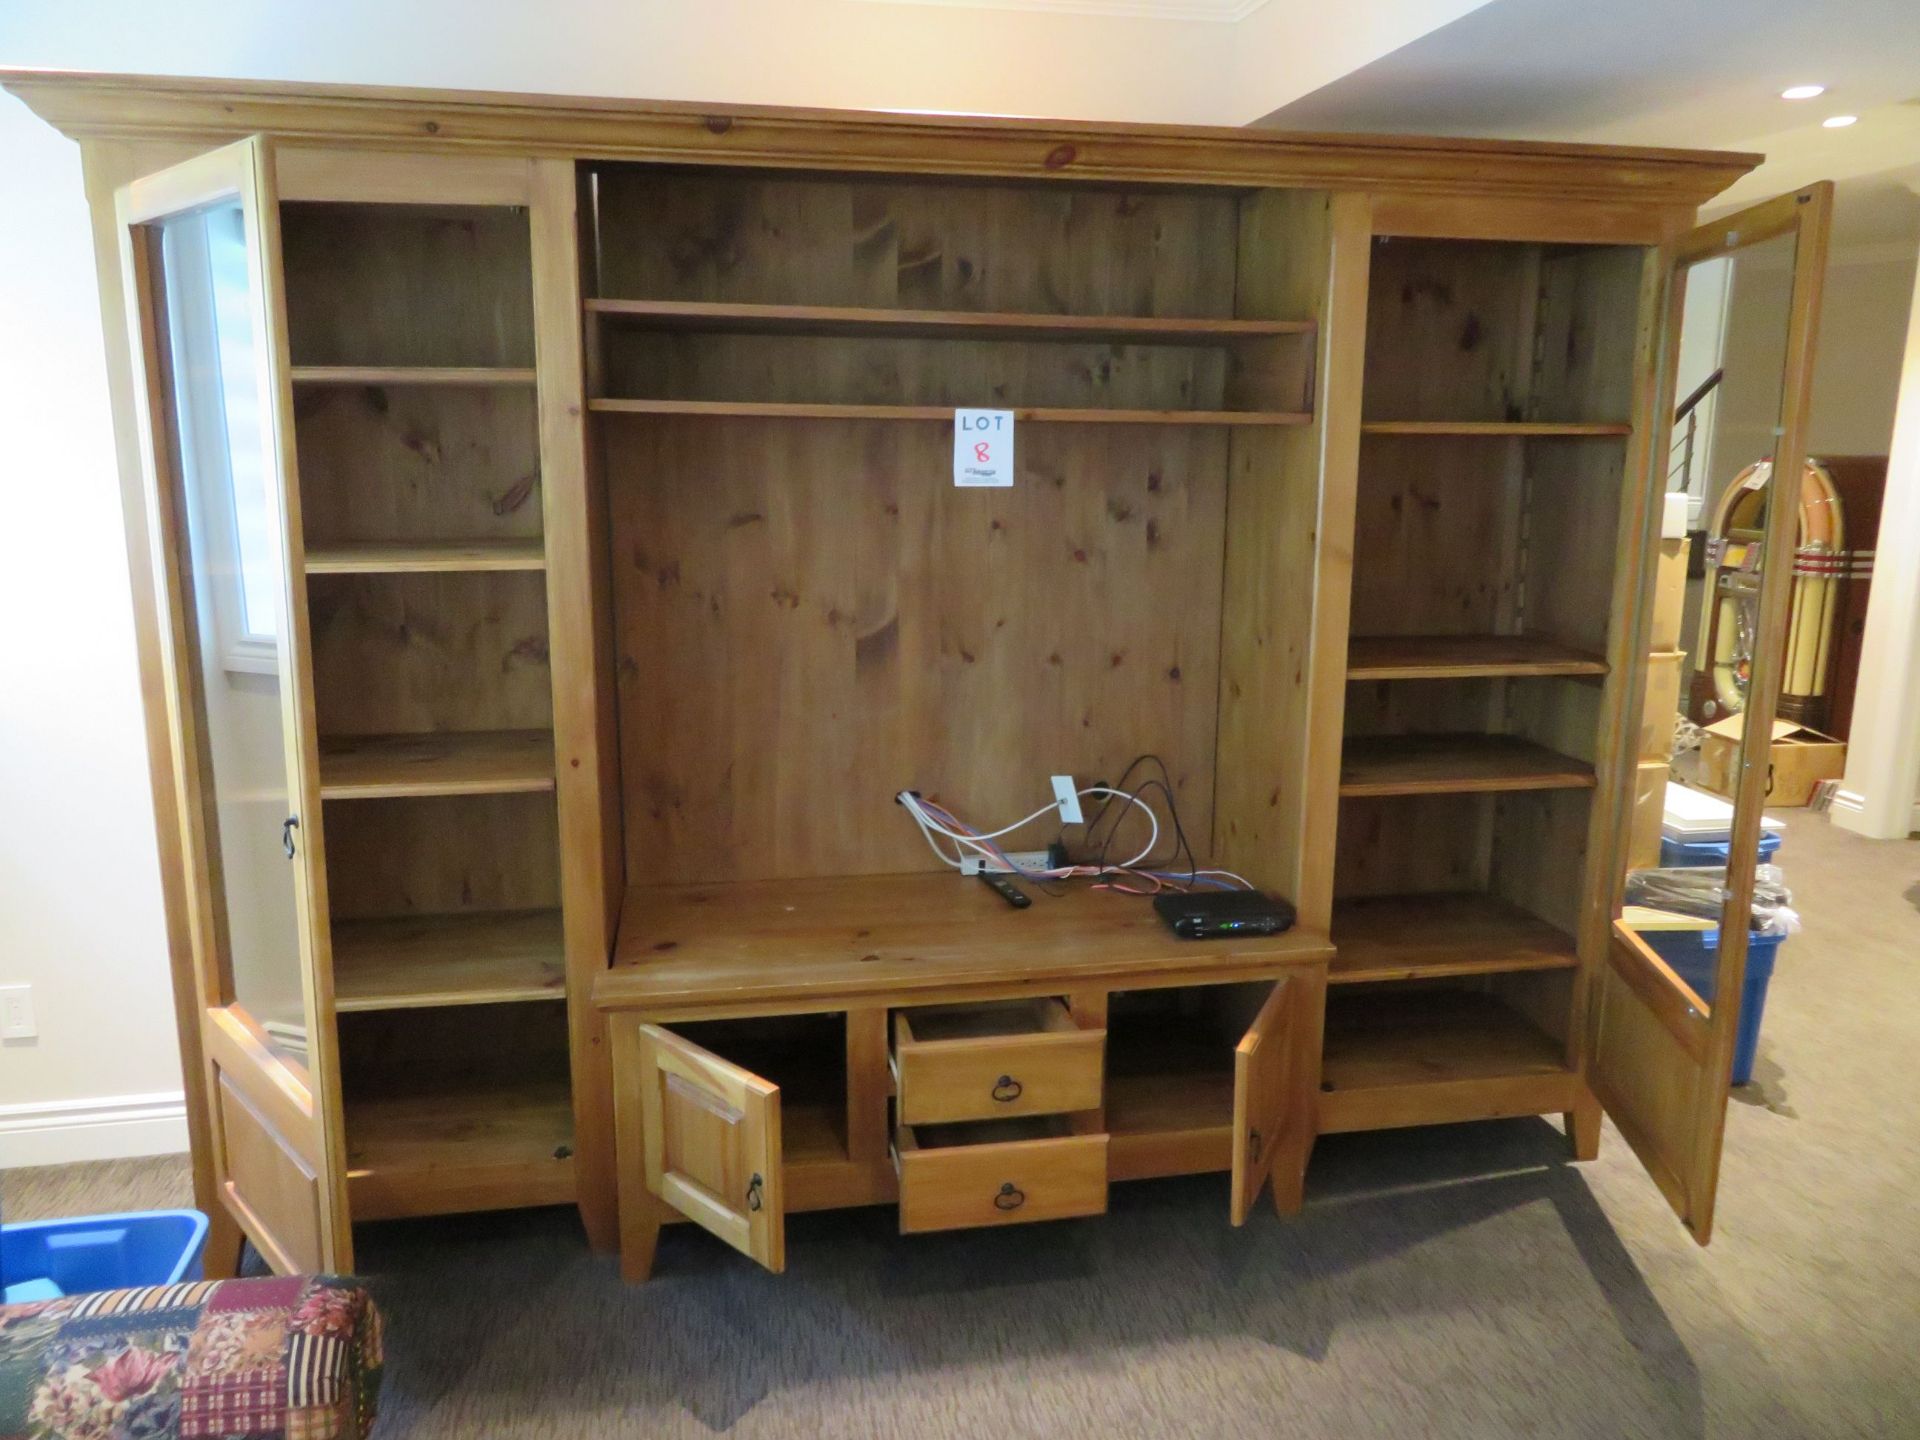 LOT including (1) decorative wood wall unit approx. 114"w x 21"d x 84"h / (2) units 30"w with - Image 2 of 3